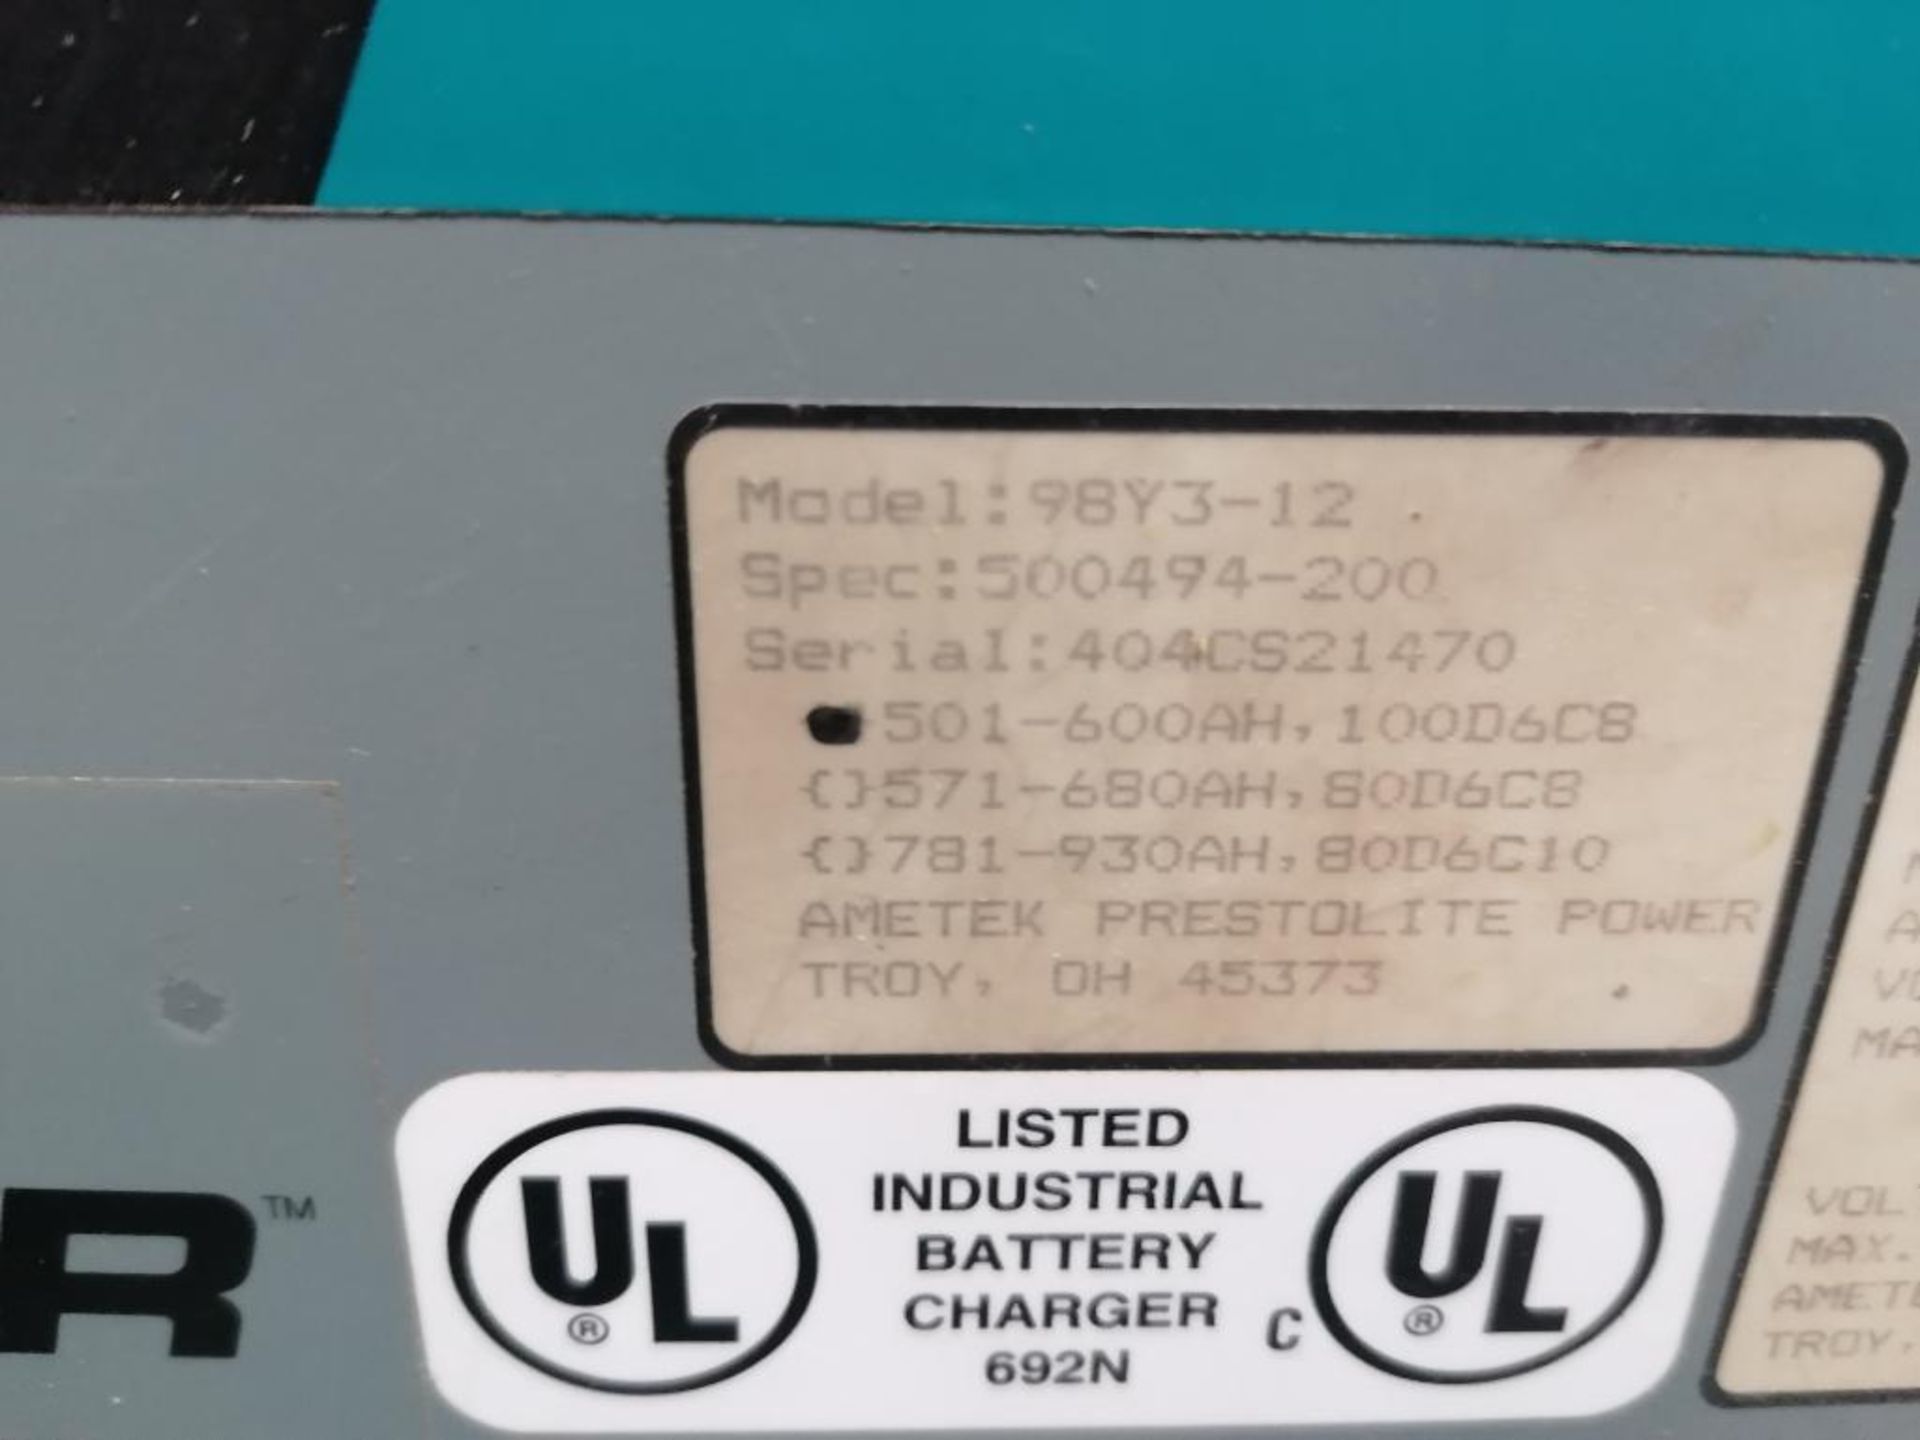 (4) PowerStar SCR1000 Industrial Forklift Battery Charger, Model 98Y3-12, Serial #404CS21472, Serial - Image 9 of 19